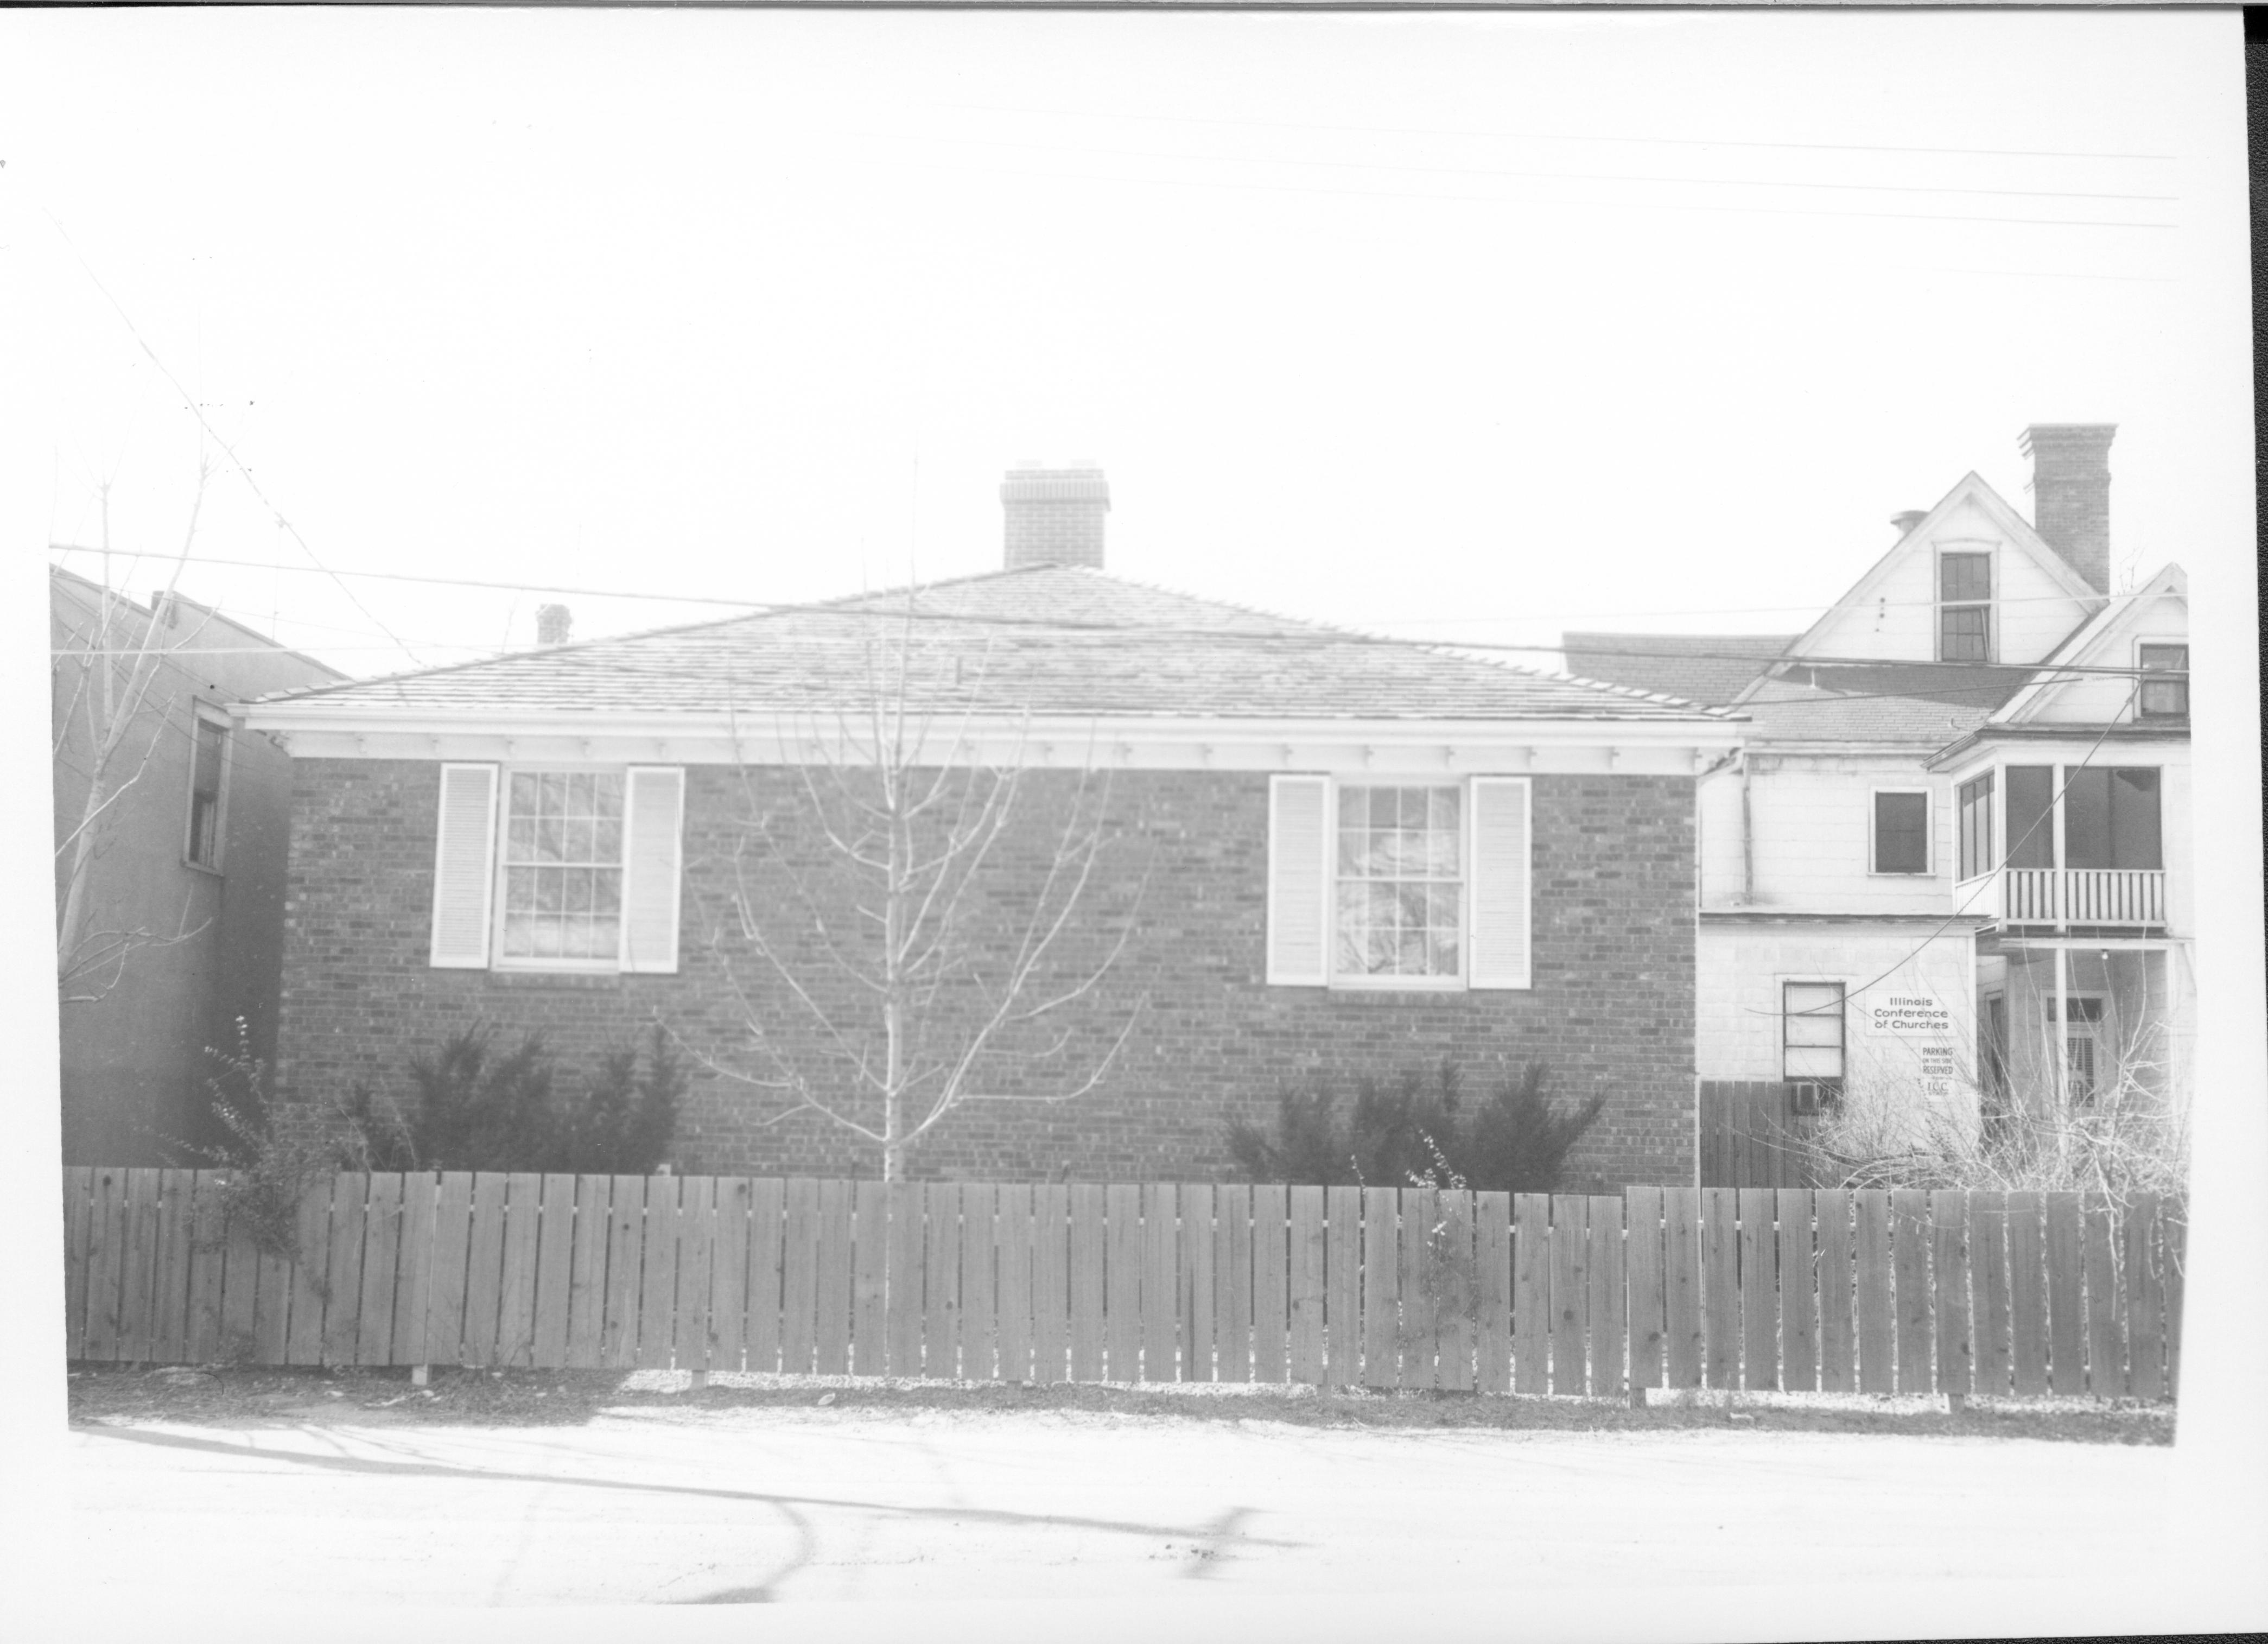 Building owned by Eveyln Grummon used by Springfield Marine Bank. Labeled as Barrister Building. Located on Block 7, Lot 6 along 7th Street.  House on right belonged to Eugene McNally Looking west from alley Springfield Marine Bank, Barrister Building, Visitor Center, McNally, Grummon